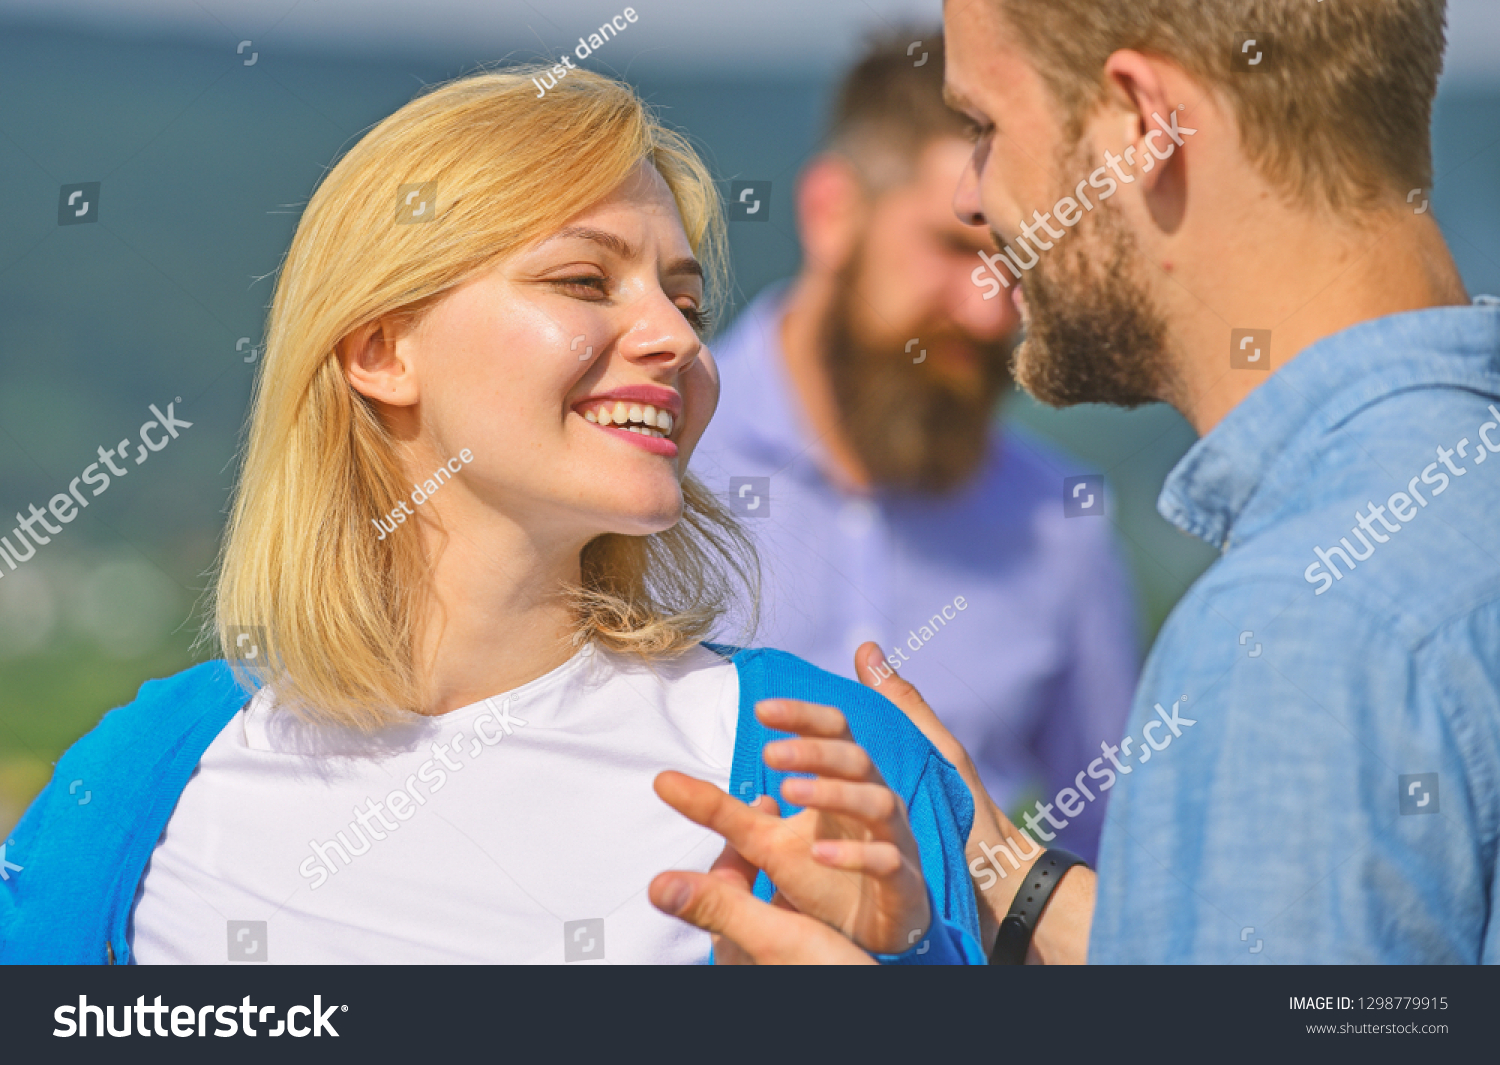 Couple in love happy dating, jealous bearded man watching wife cheating him with lover. Couple romantic date lovers flirting. Lovers meeting outdoor flirt romance relations. Jealous concept. #1298779915